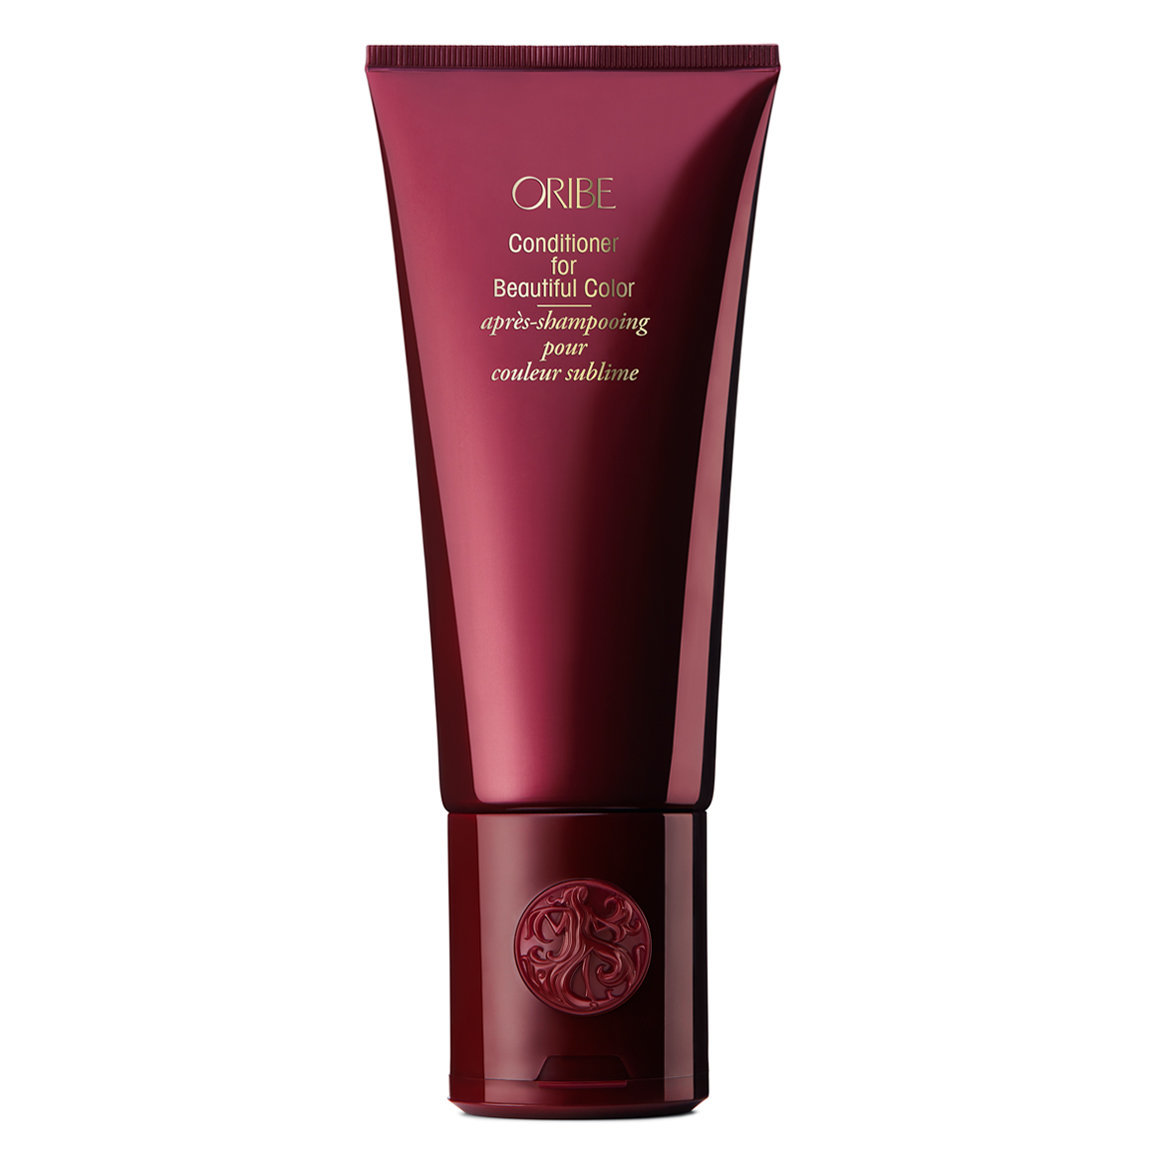 Oribe Conditioner for Beautiful Color 6.8 fl oz alternative view 1 - product swatch.